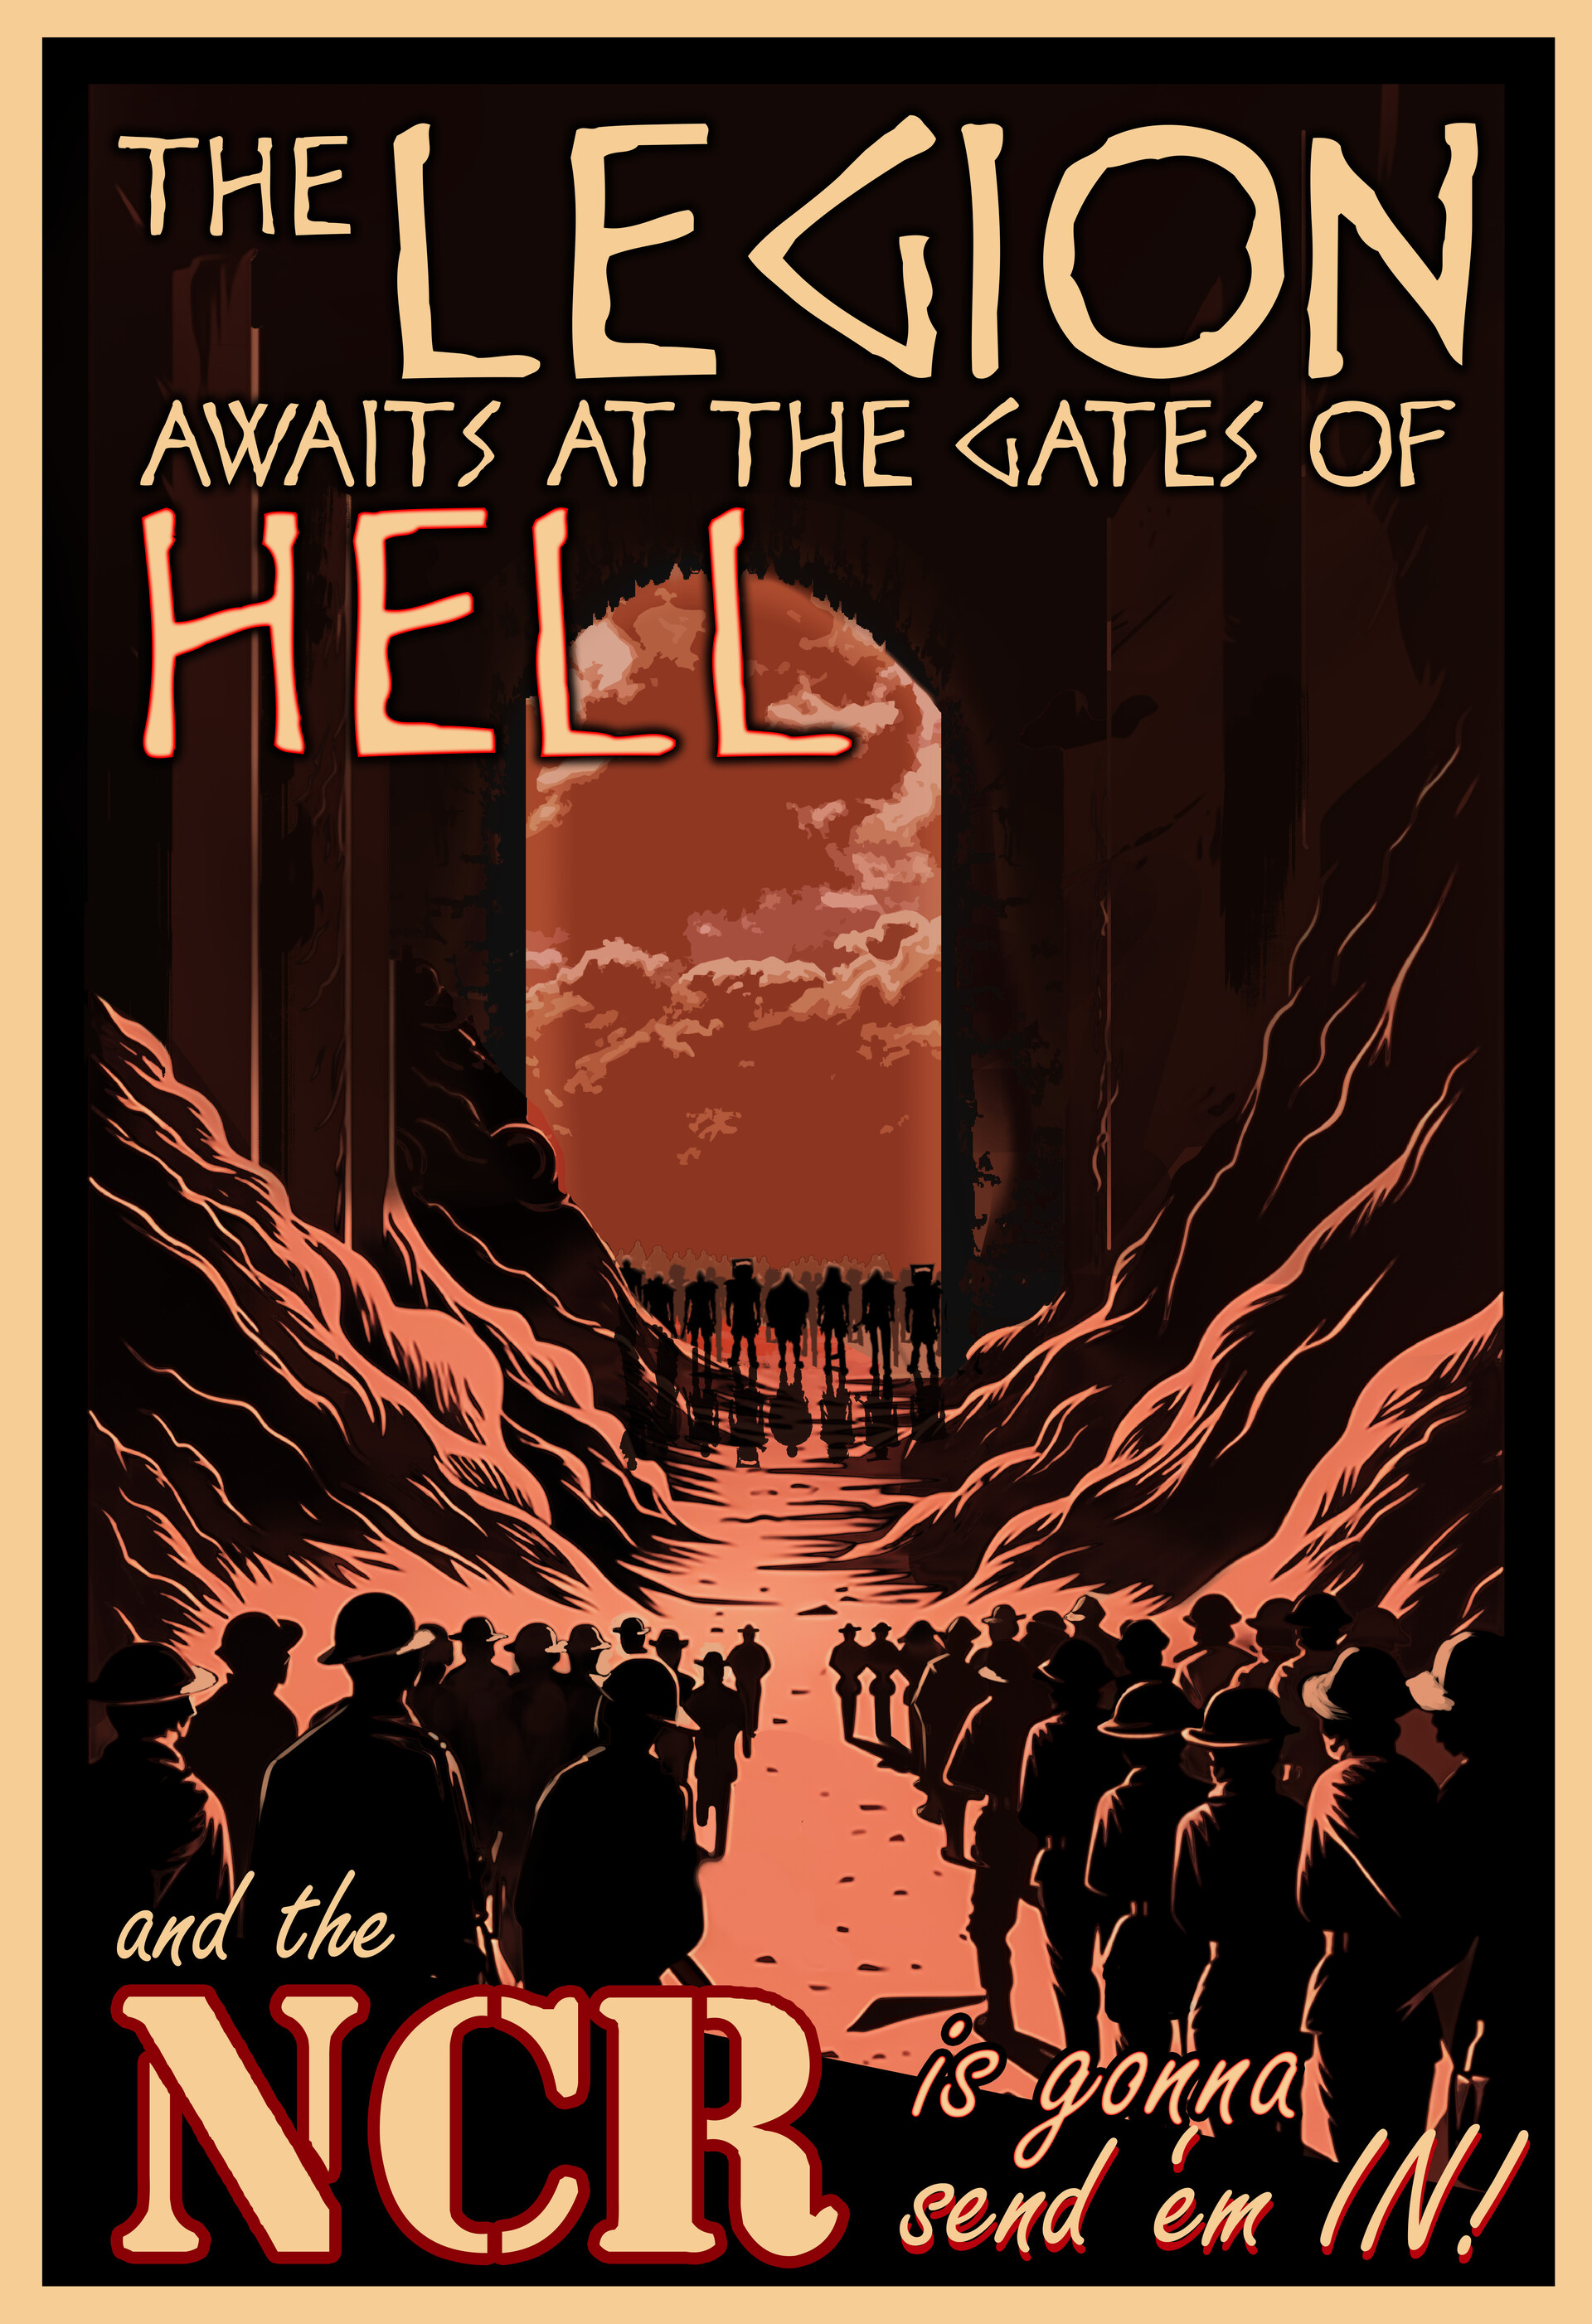 ArtStation - Fallout NCR Poster - The Legion Awaits at the Gates of Hell!